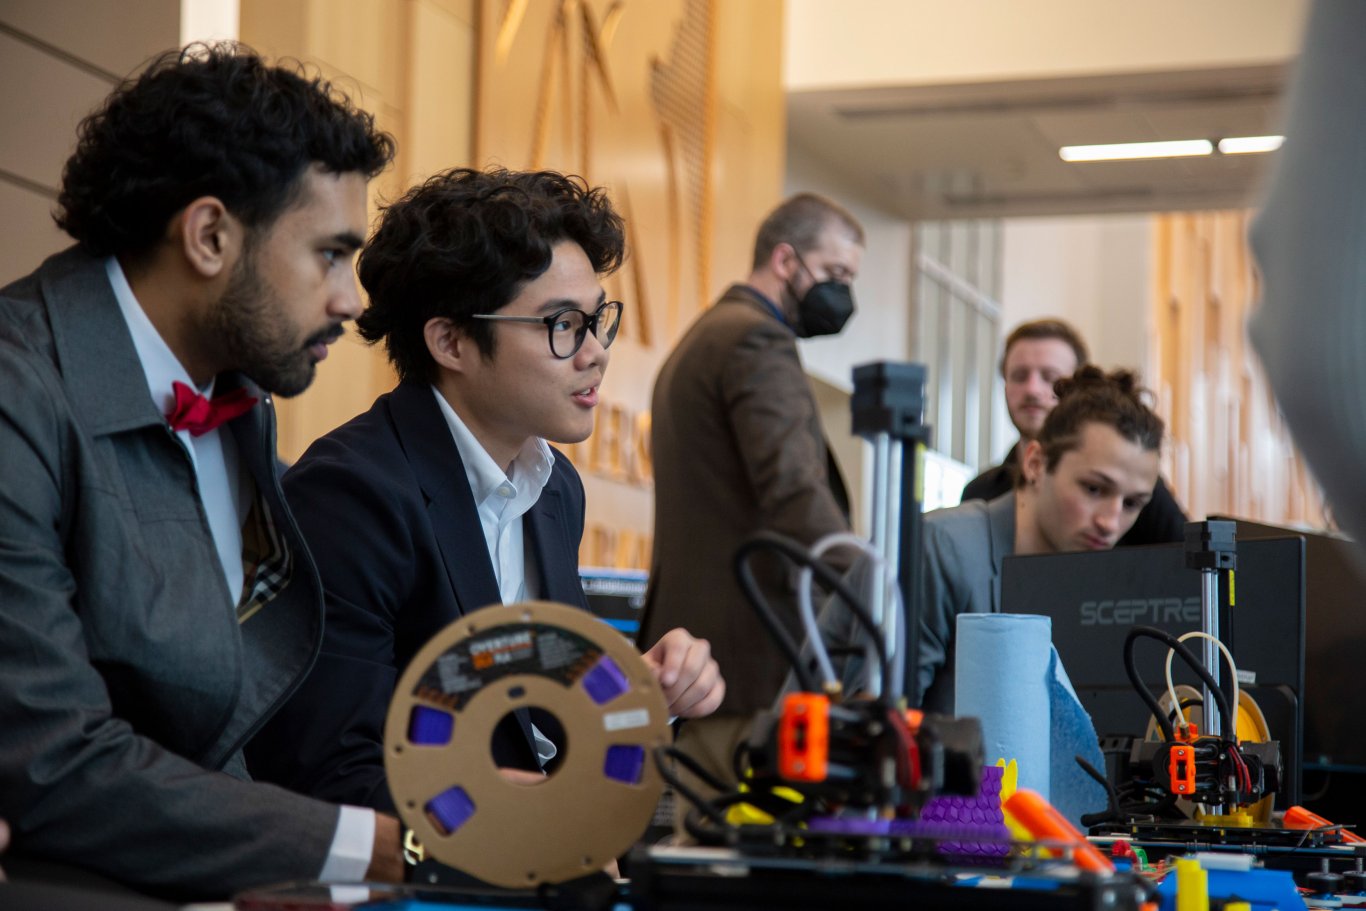 Two students in suits lean over a table with two 3D printers in front of them during UAlbany Showcase.